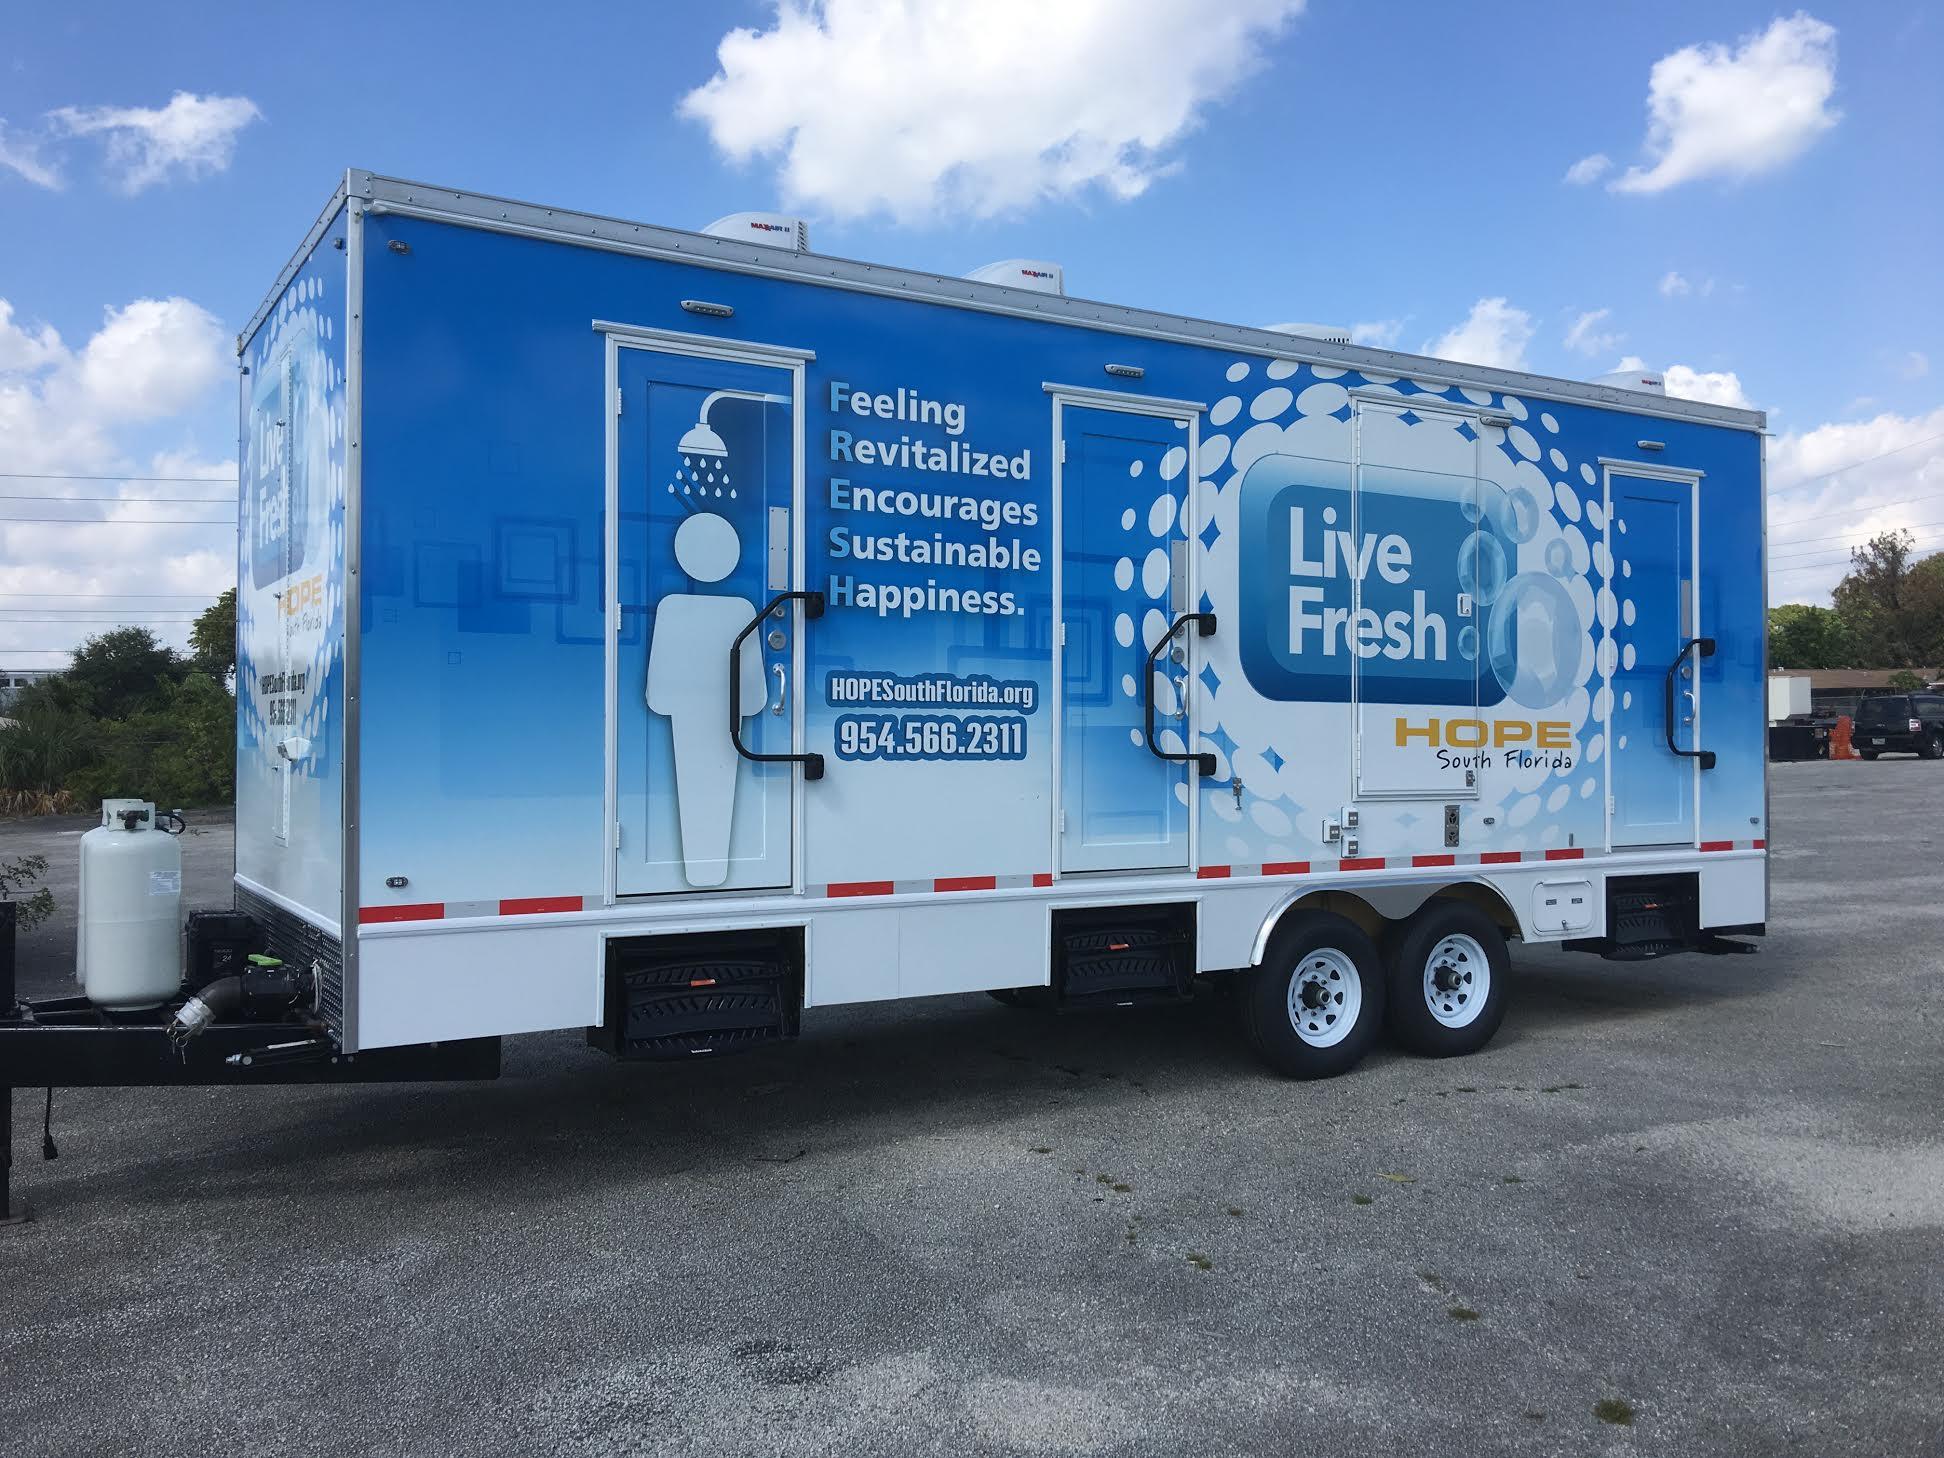 Mobile Showers For Homeless Turned Off In Fort Lauderdale Health News 